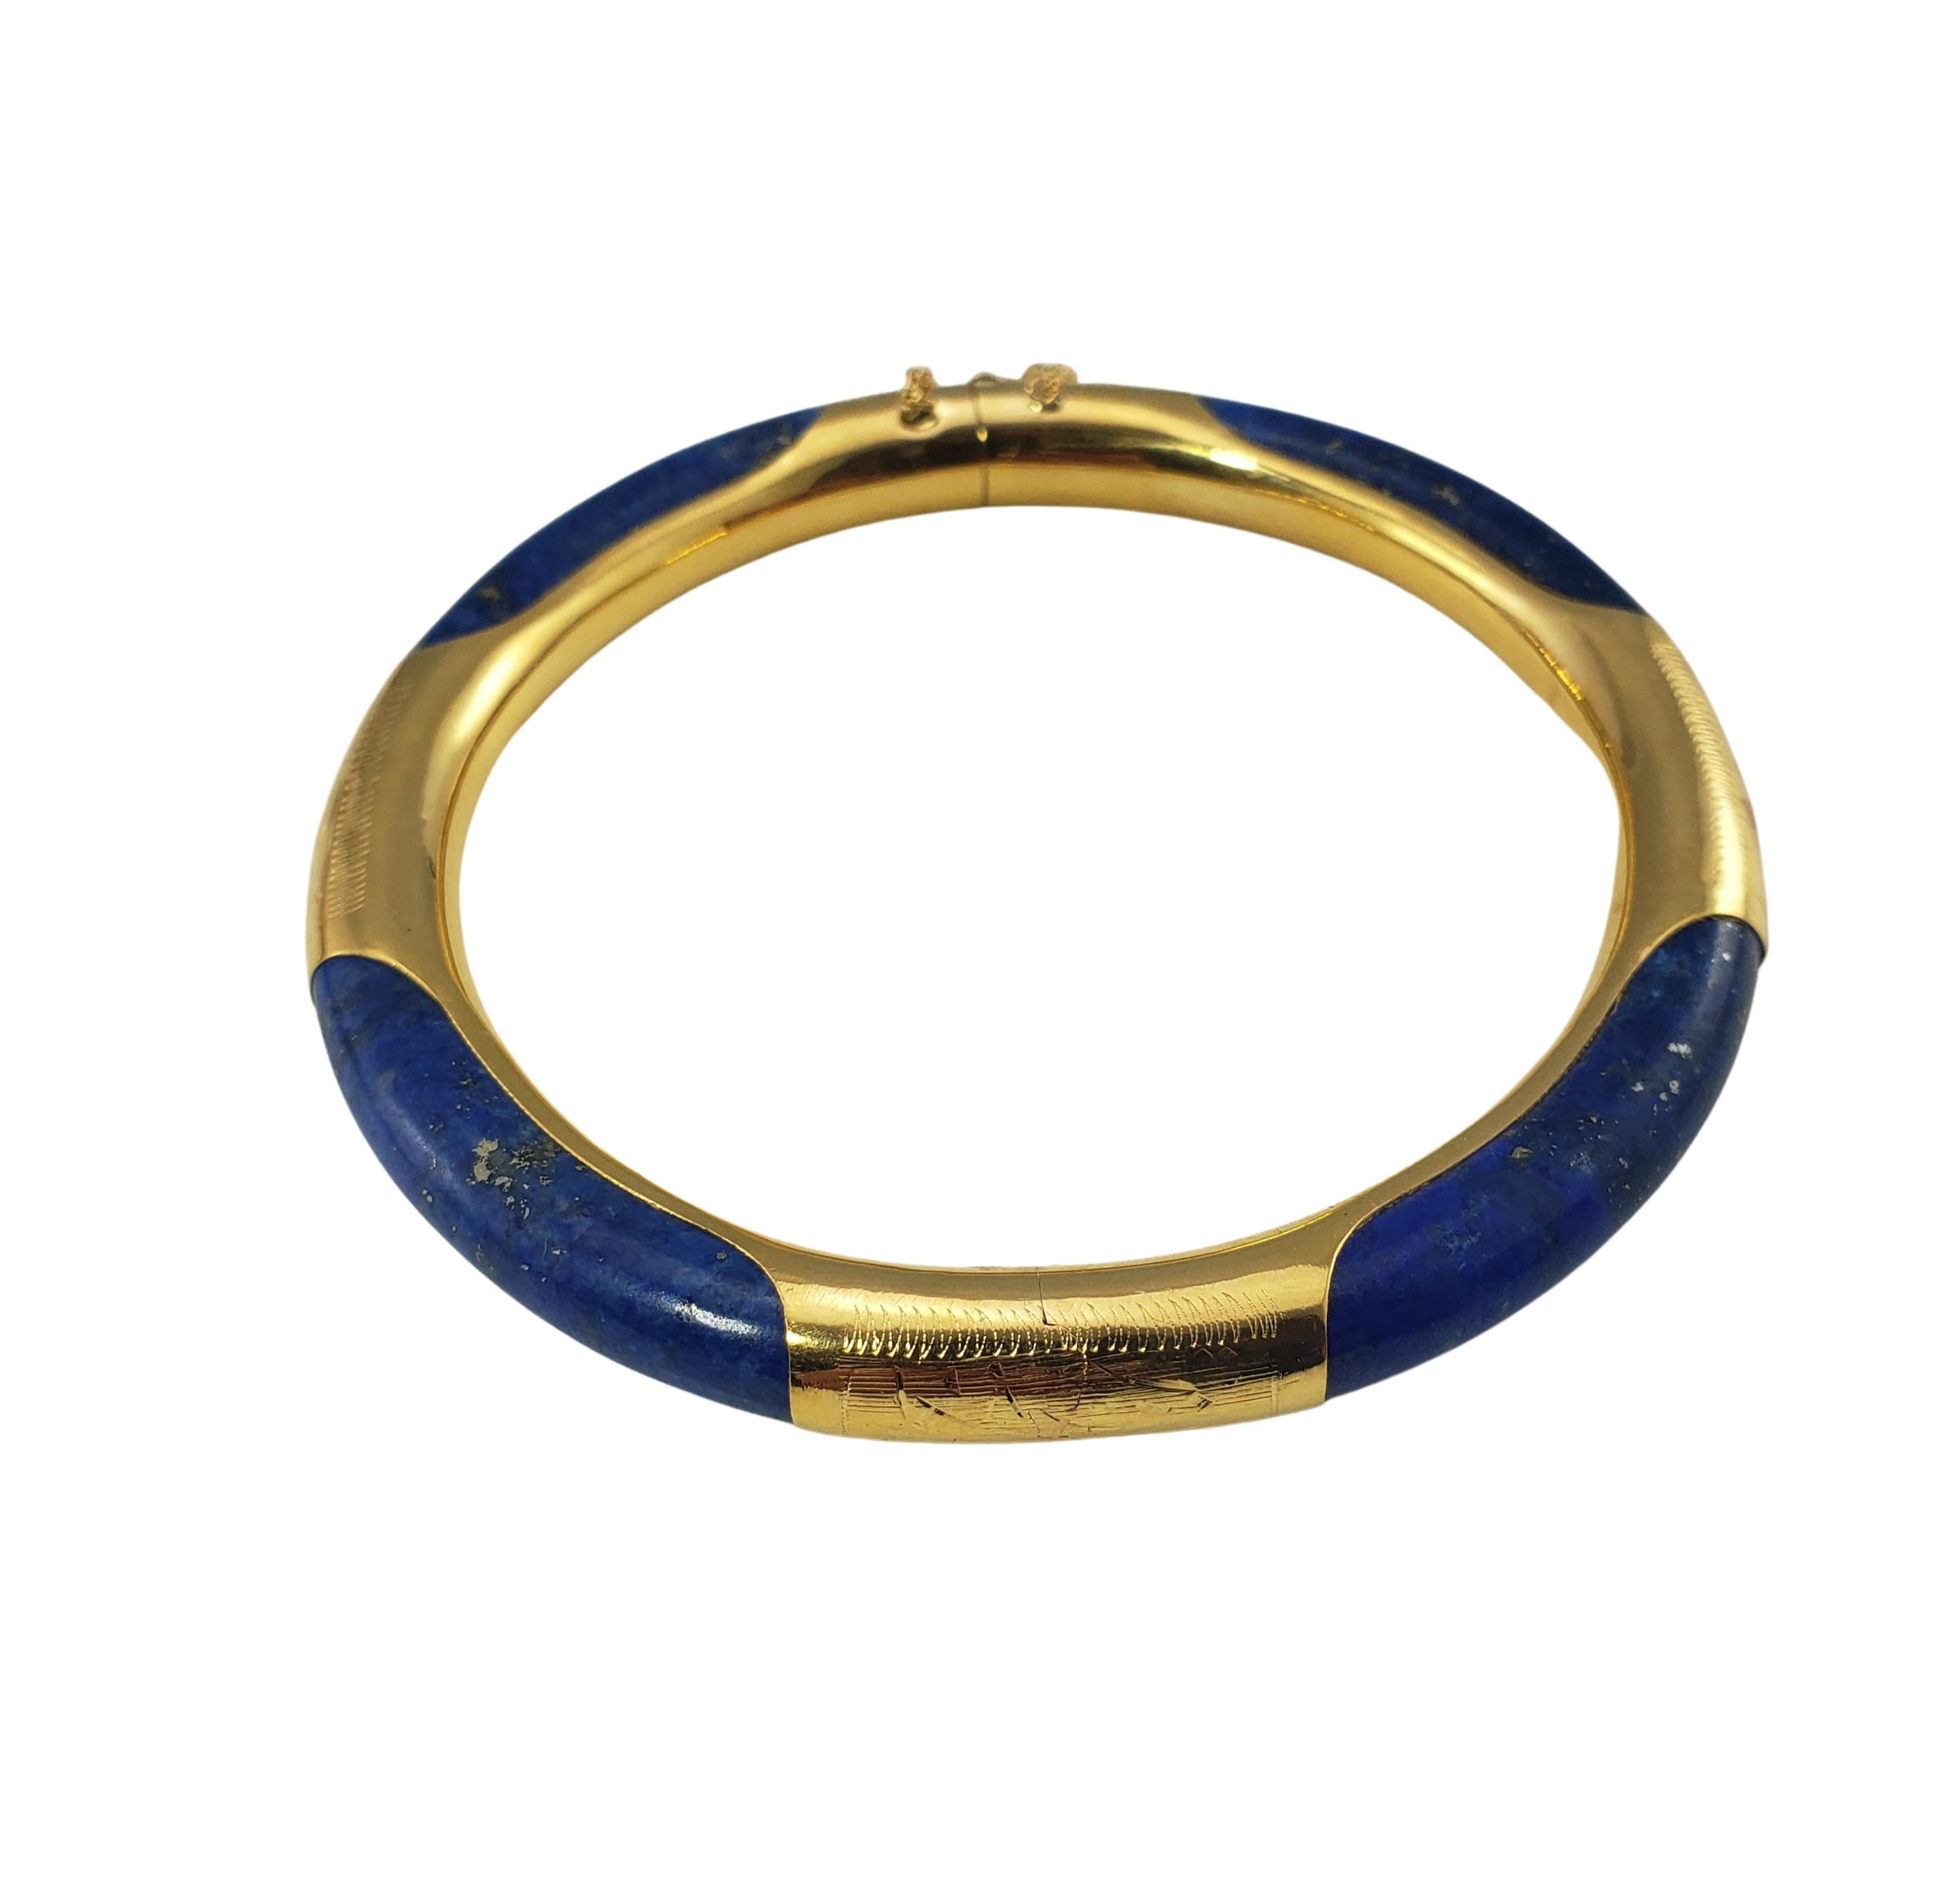 14 Karat Yellow Gold and Lapis Lazuli Bangle Bracelet-

This lovely hinged bangle bracelet is crafted in beautifully detailed 14K yellow gold and lapis lazuli.  Width:  7 mm.  Safety chain closure.

Size:   7.25 inches

Weight:   14.6 dwt. /  22.8